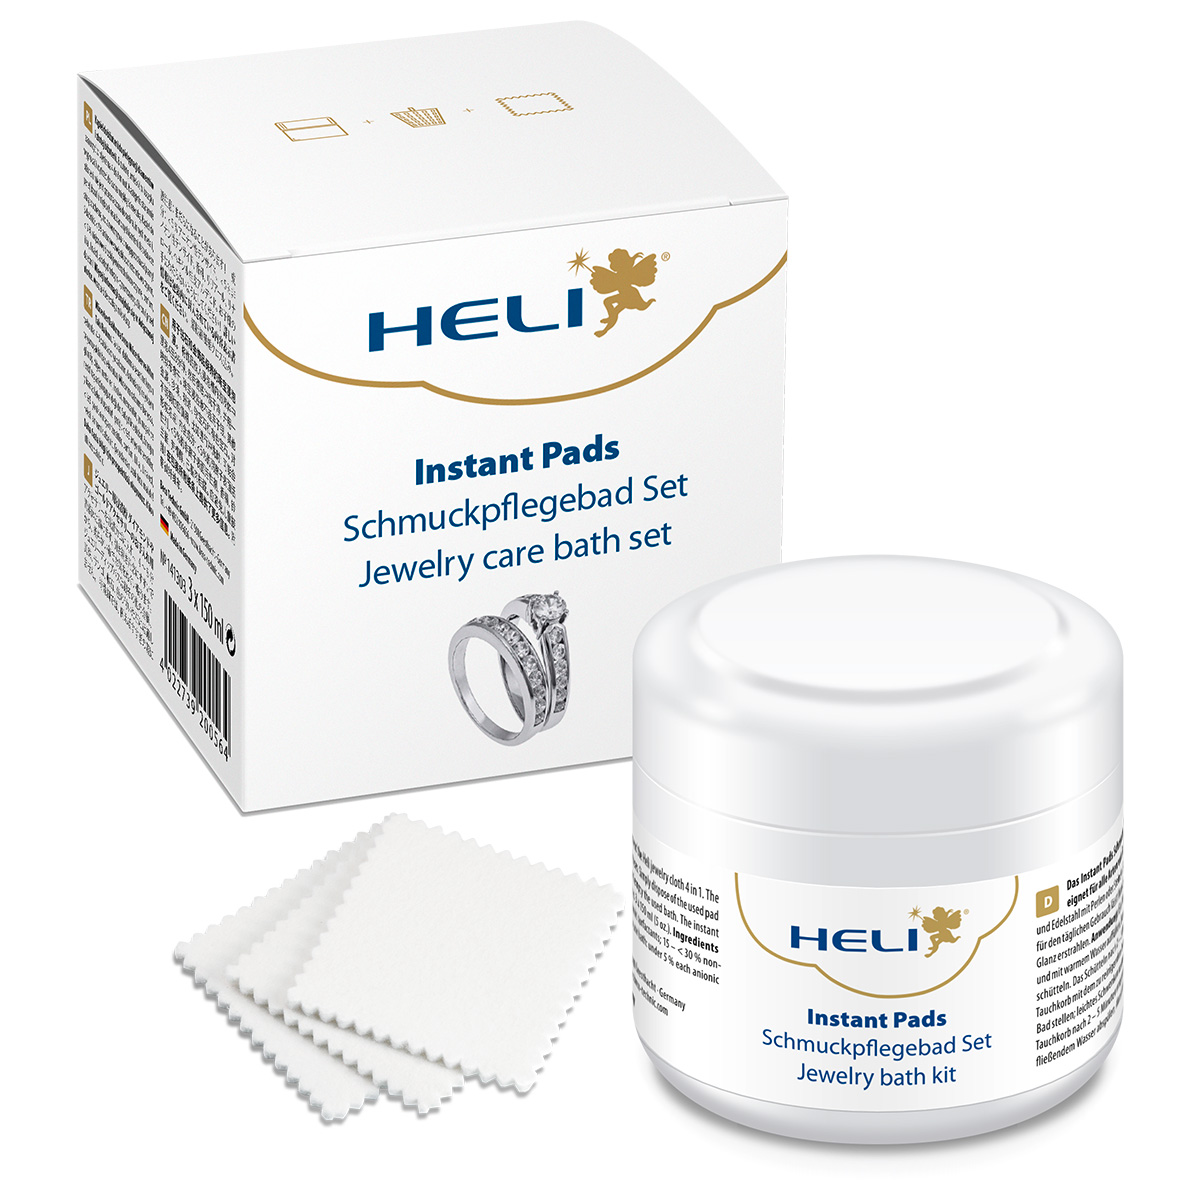 Heli Instant Pads jewelry care bath set incl. 3 pads